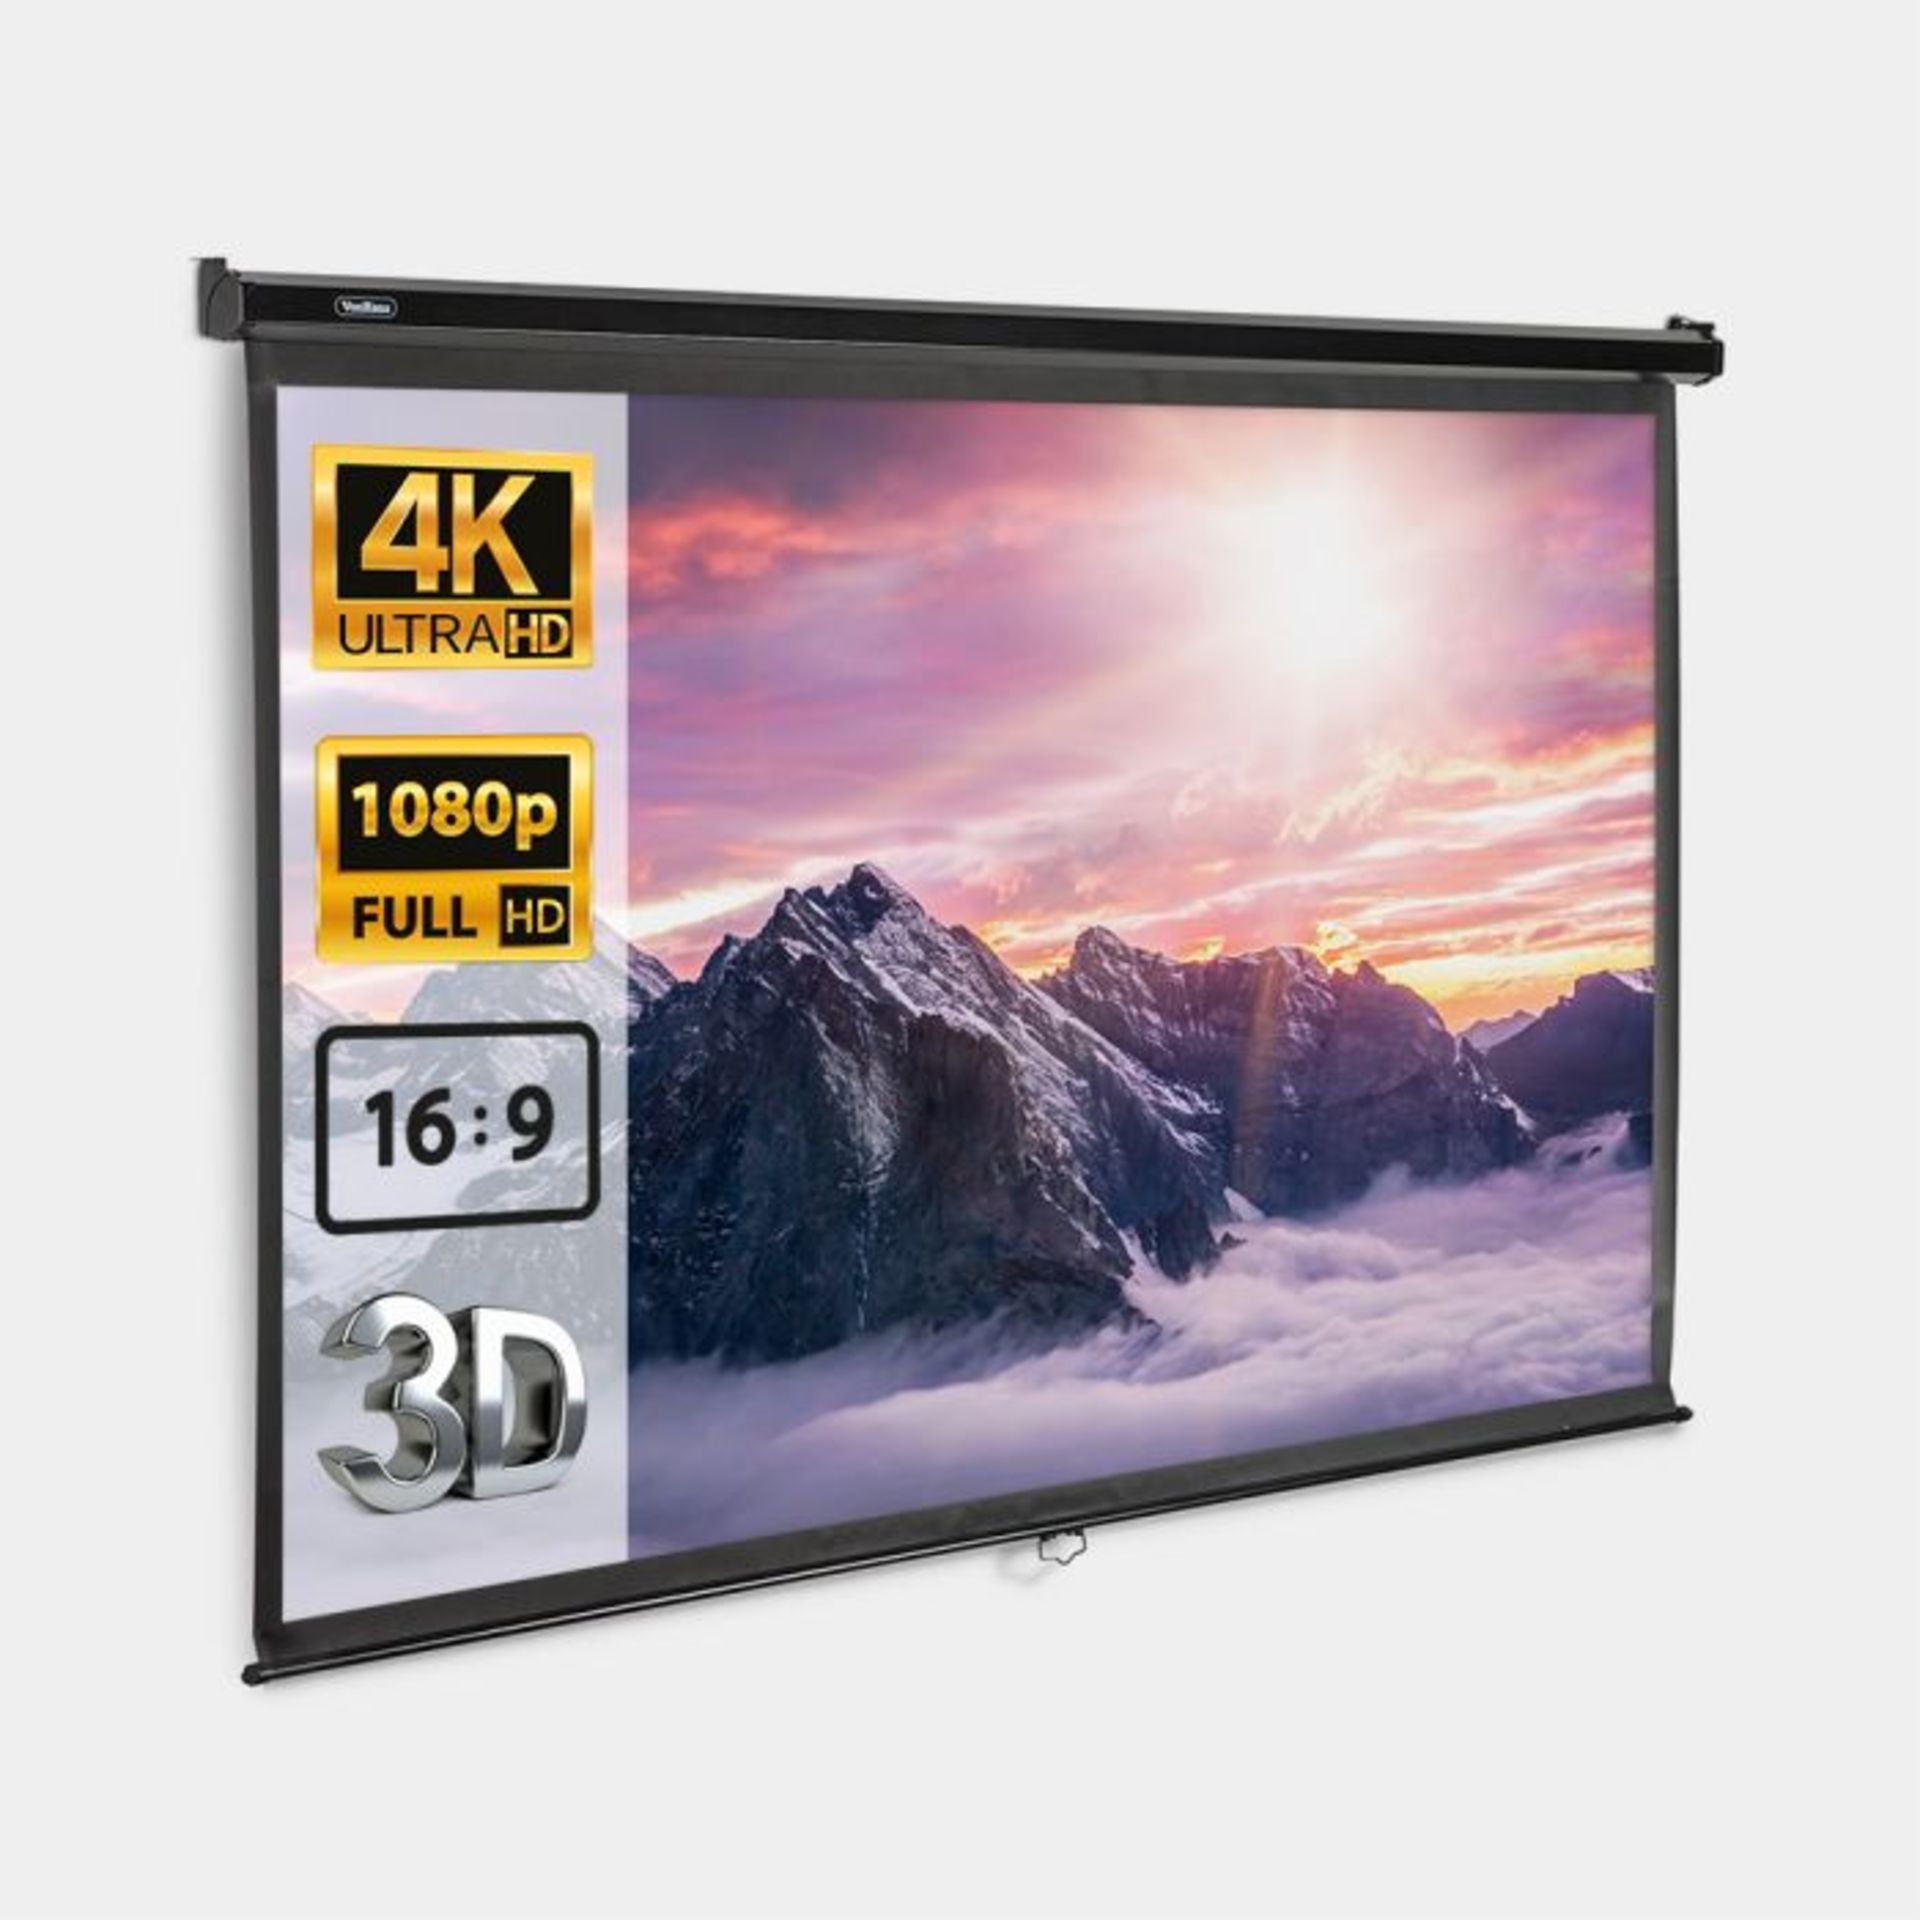 90" Projector Screen. - ER52. You’ll appreciate the high-quality matte white screen which has a gain